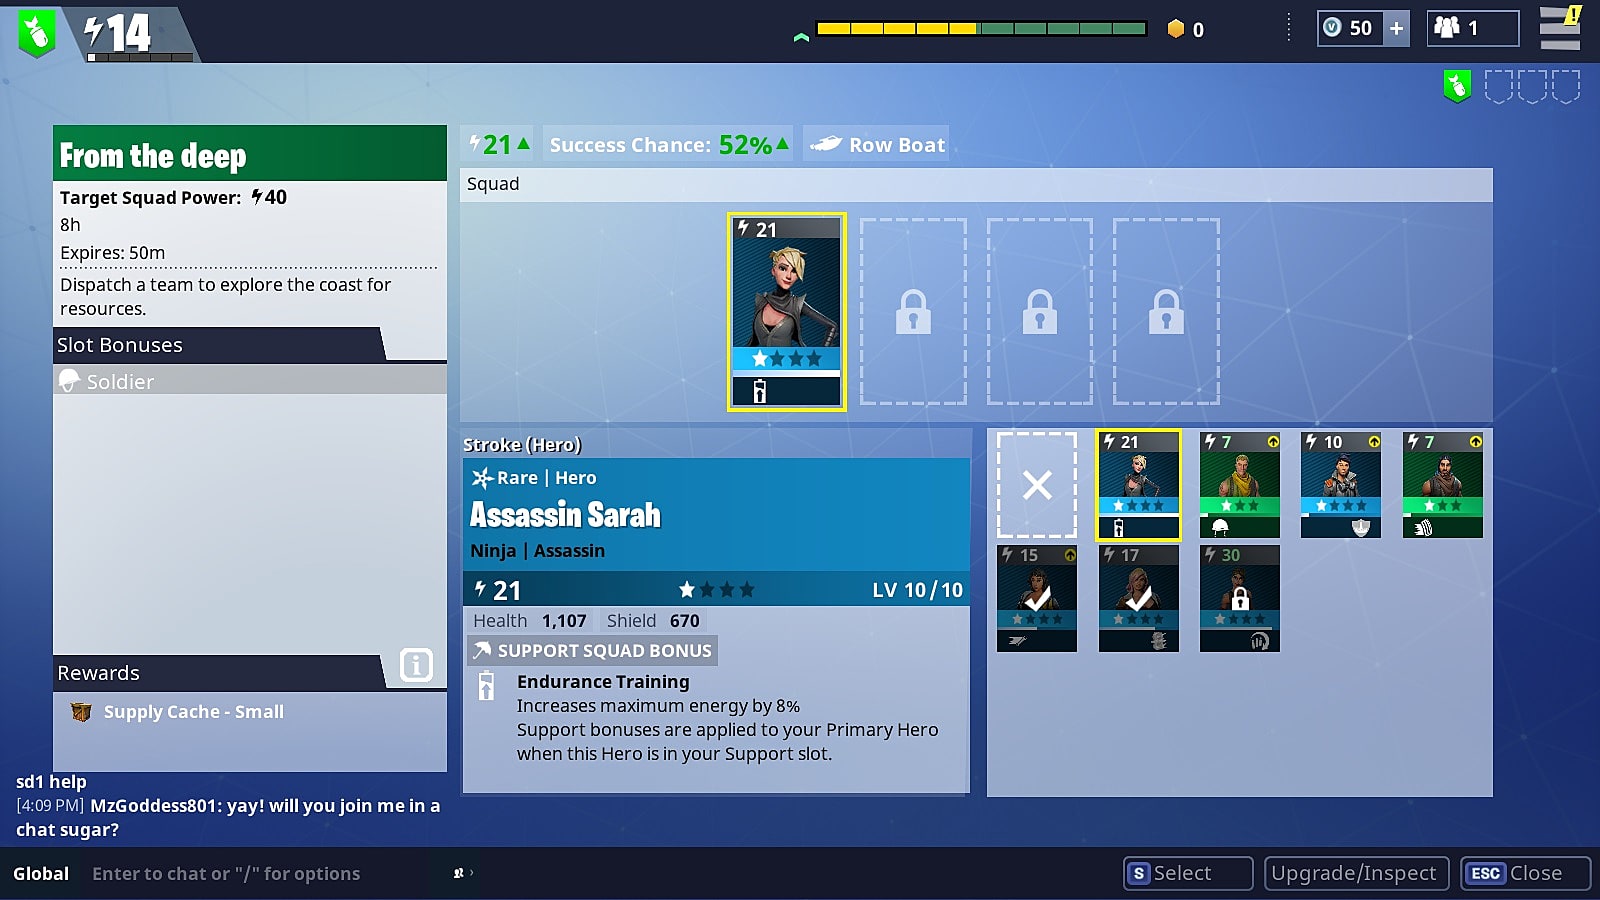 starting an expedition with a 52 chance of success - what does homebase rating 1 mean in fortnite